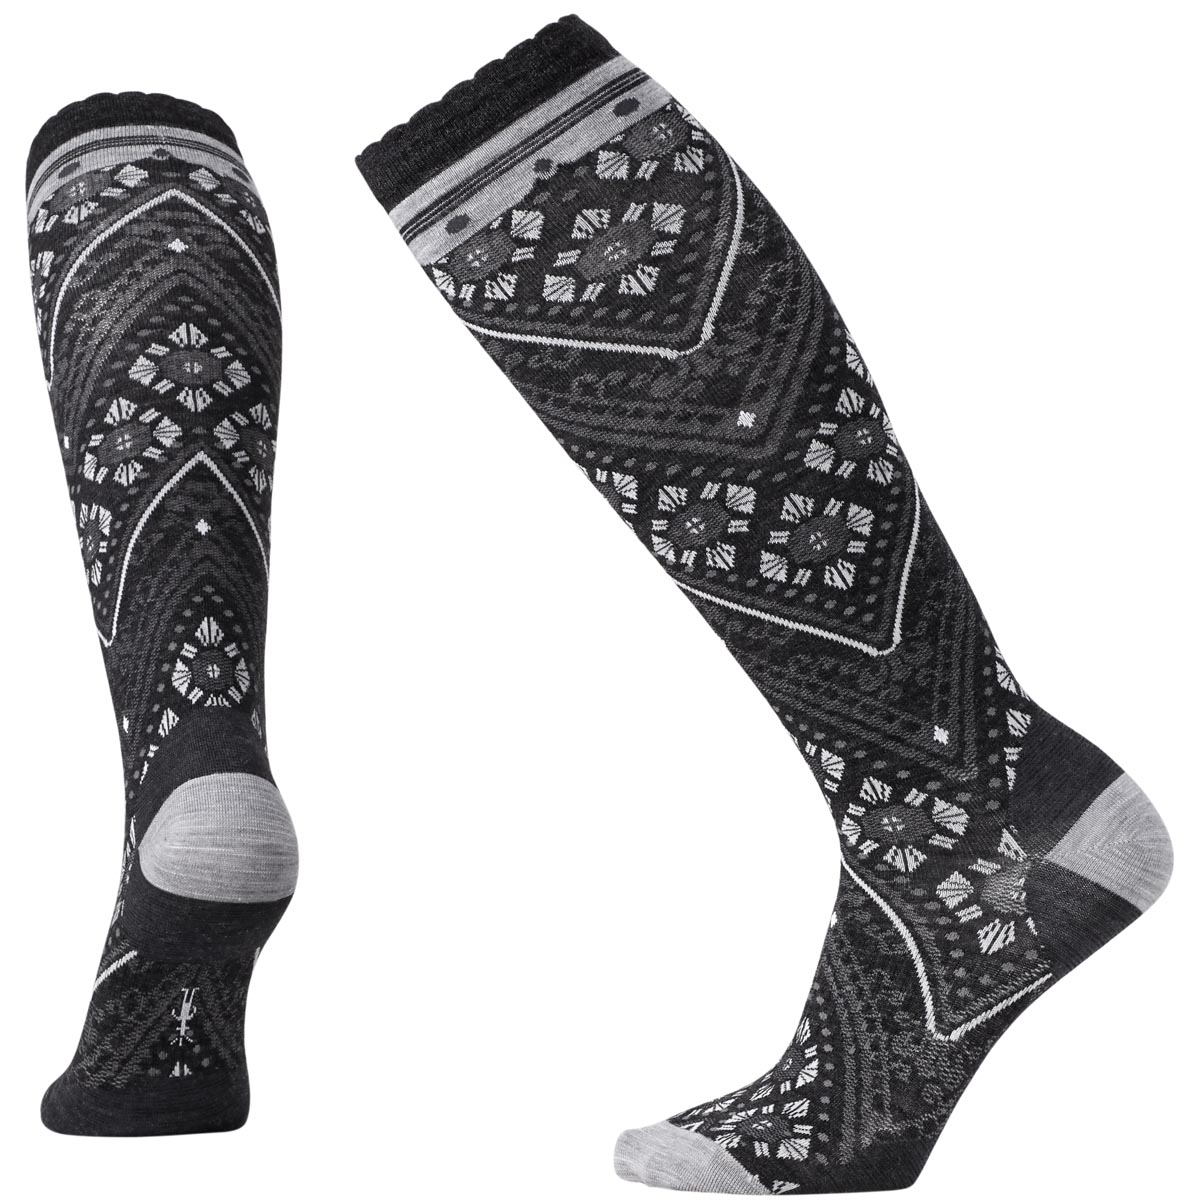 SmartWool Womens Lingering Lace Knee High